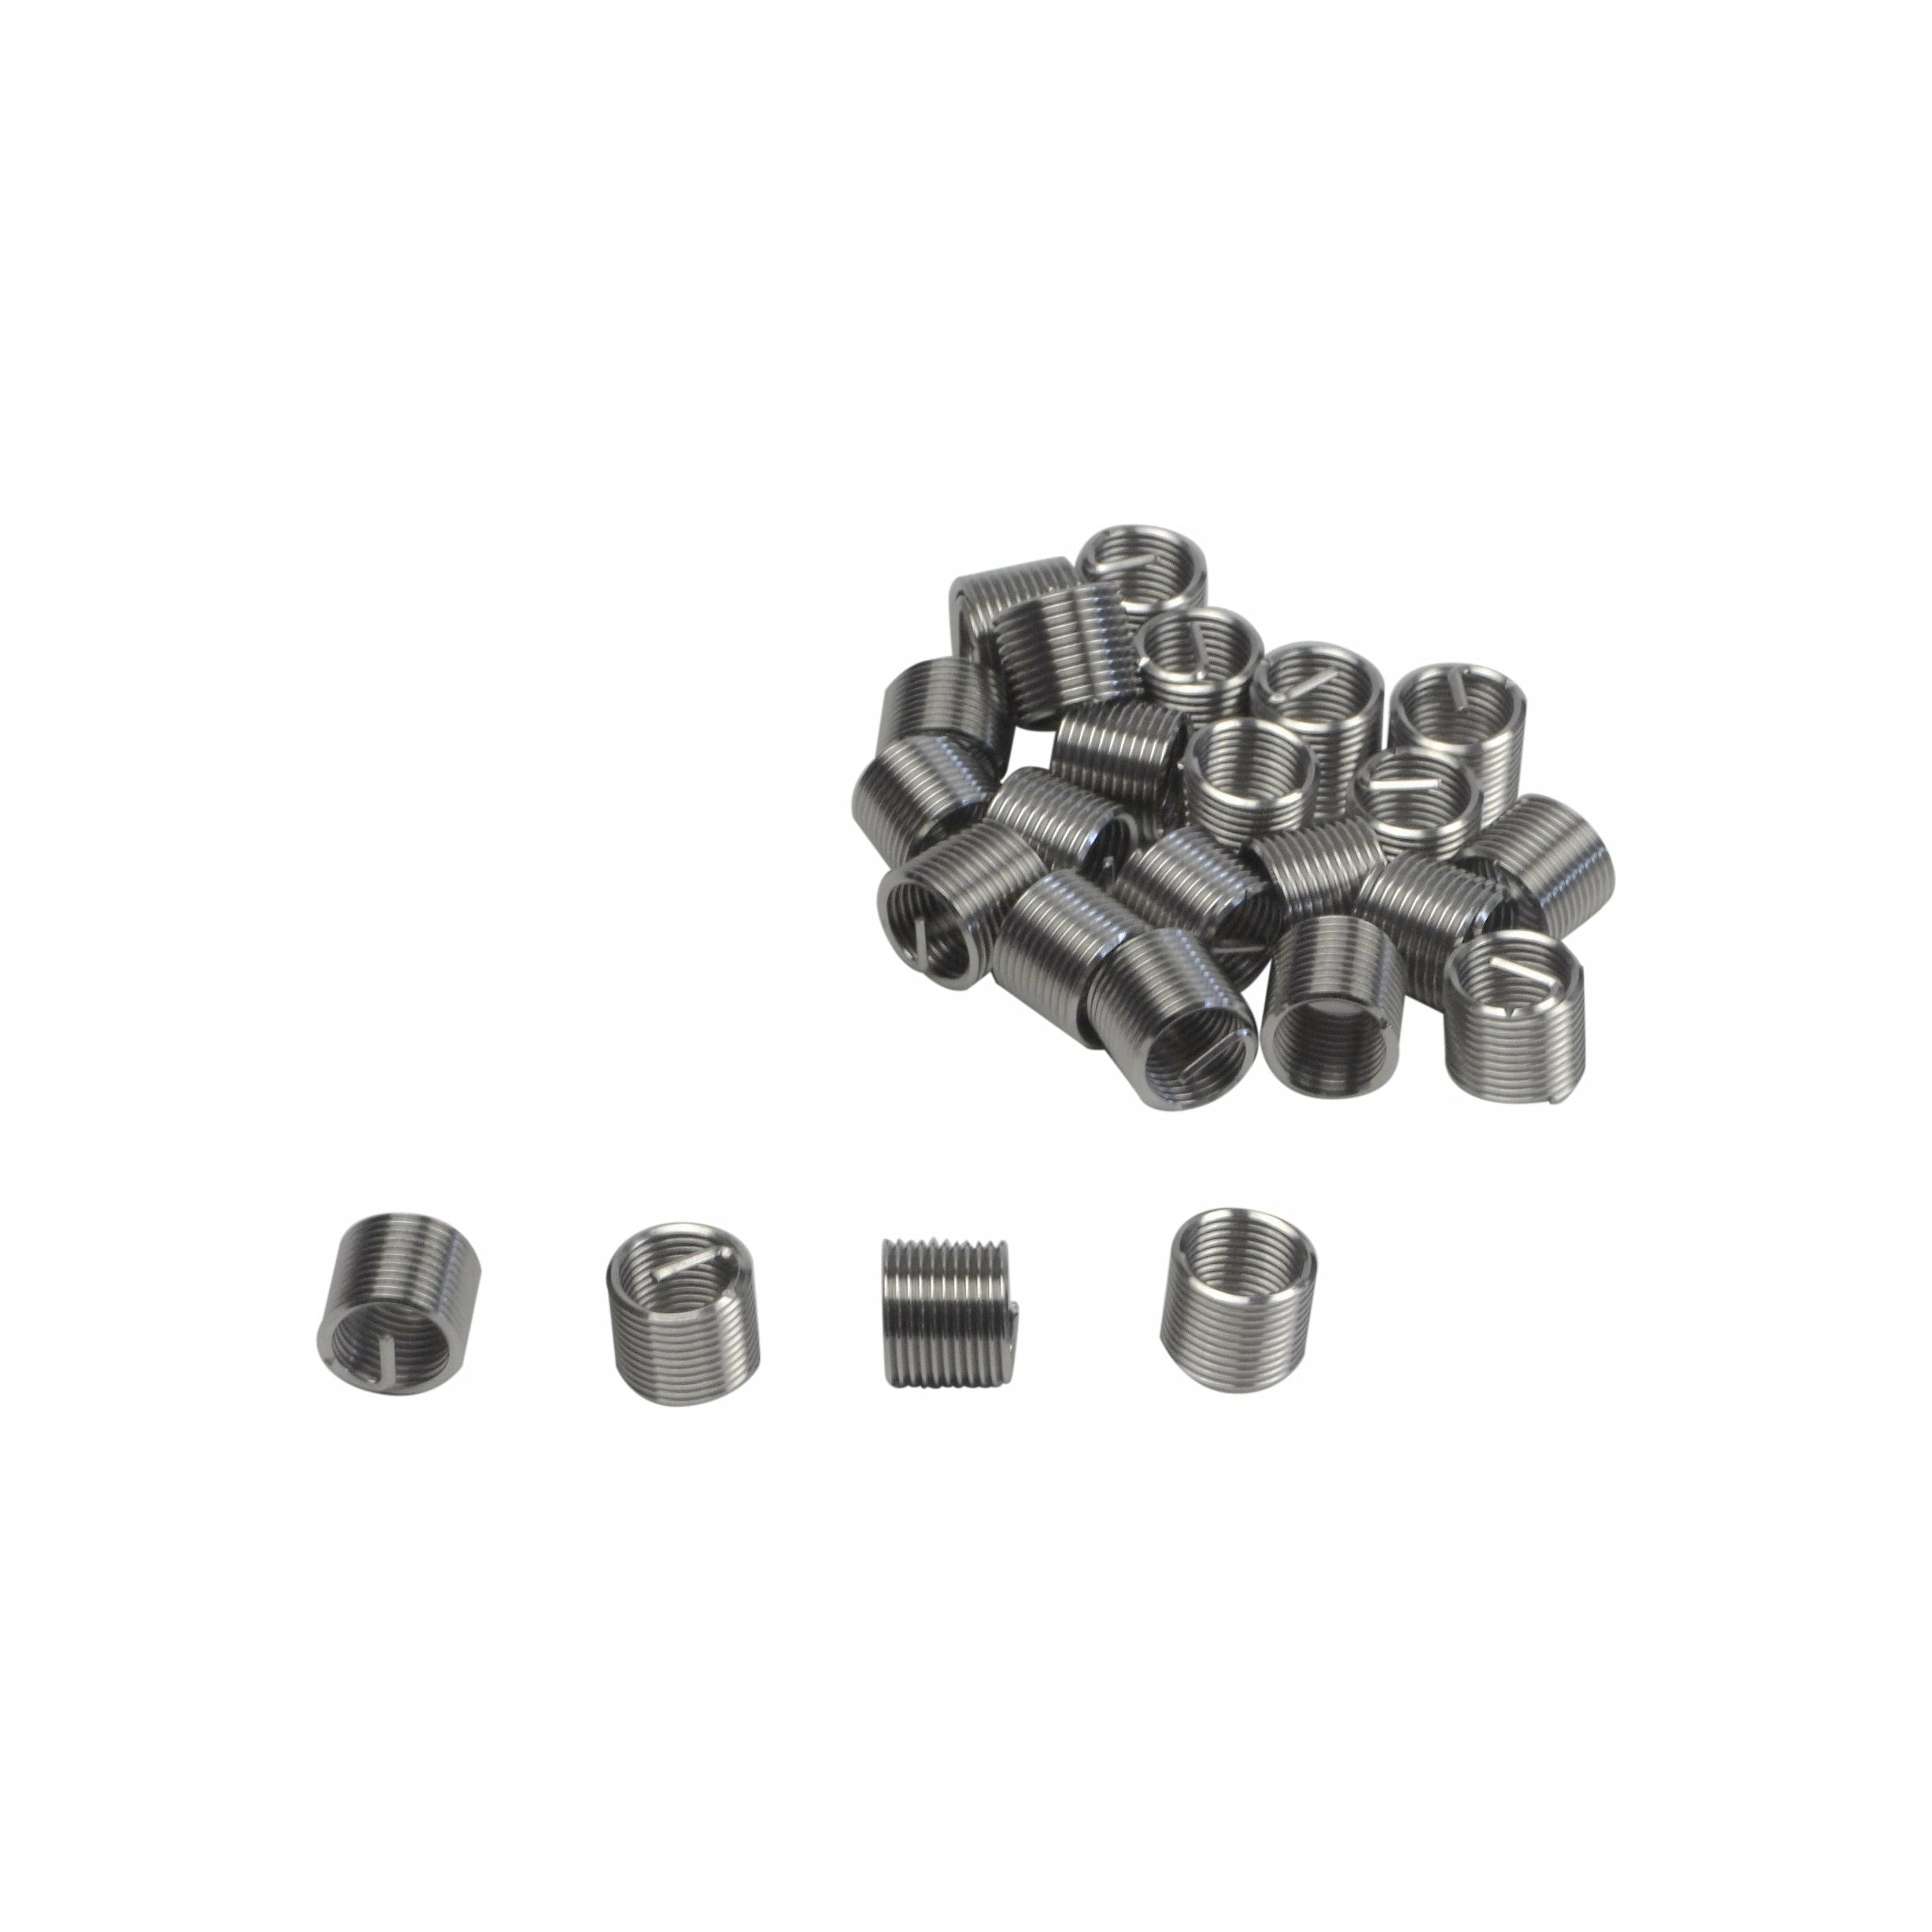 Helicoil Kit 3/8 - 24 thread Repair Insert Tap Set 31 Piece, helical kit